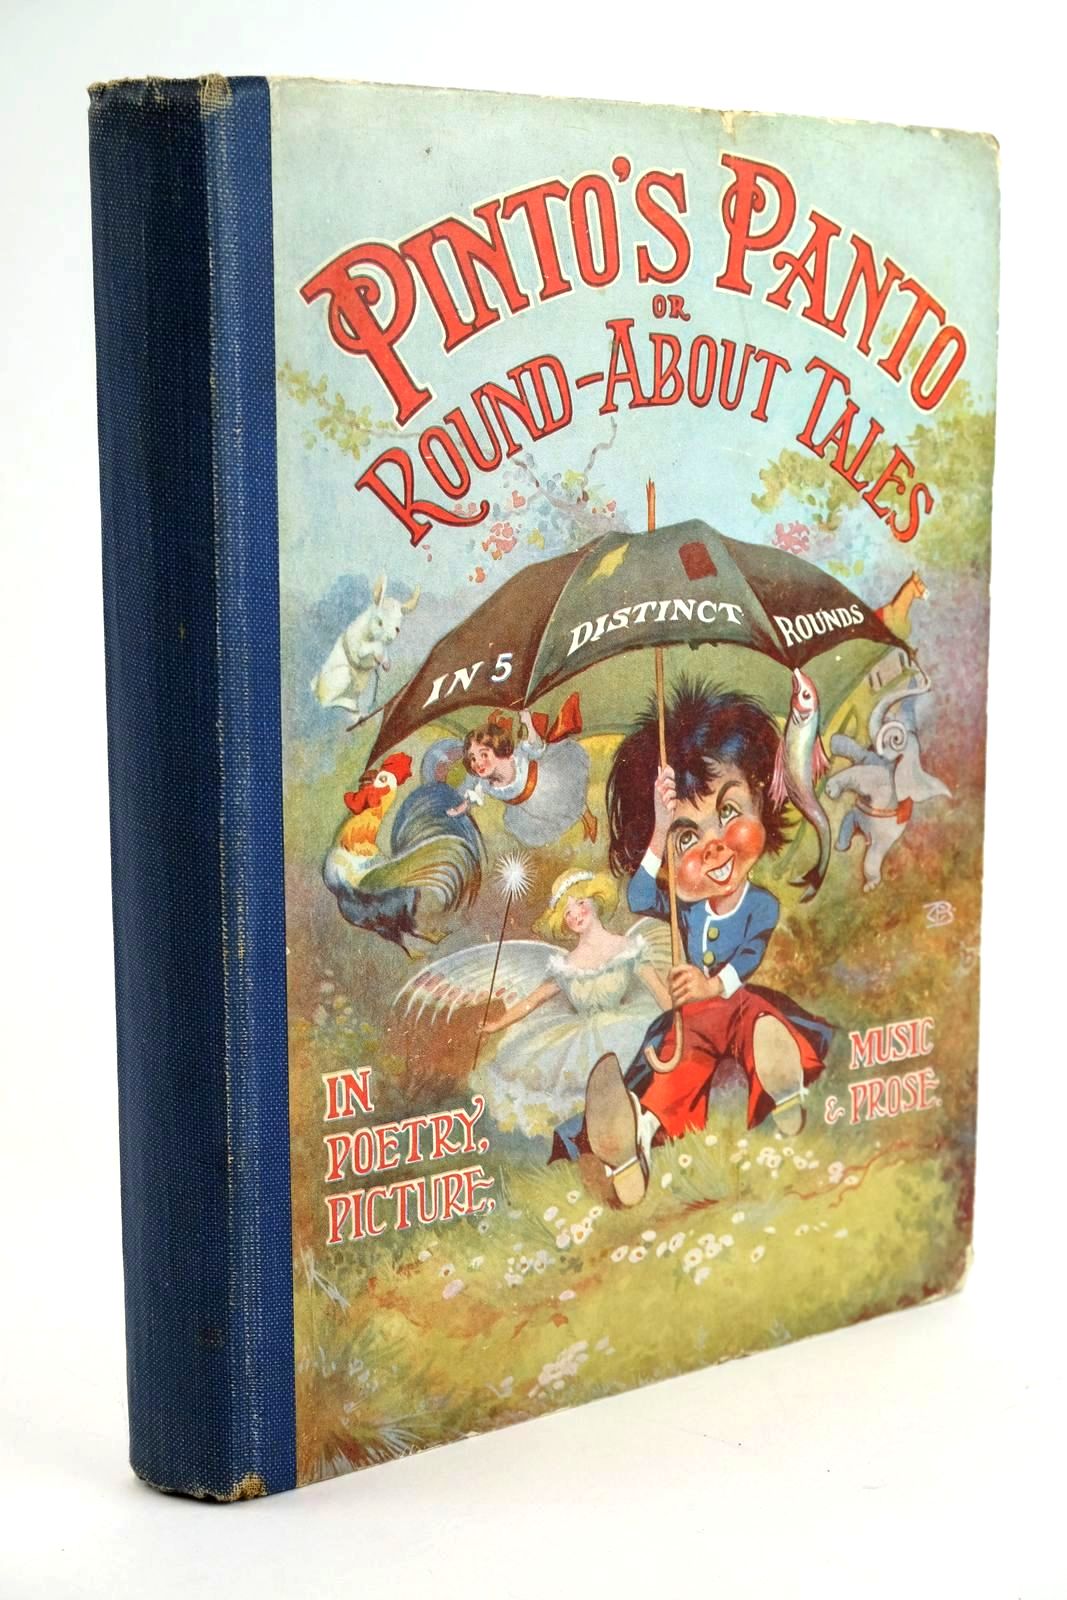 Photo of PINTO'S PANTO OR ROUND-ABOUT TALES IN POETRY, MUSIC, PICTURE &amp; PROSE written by Hall, Hilda Reed, Langford Todd, Barbara E. et al, illustrated by Various, published by Fleetgate Publications (STOCK CODE: 1323385)  for sale by Stella & Rose's Books